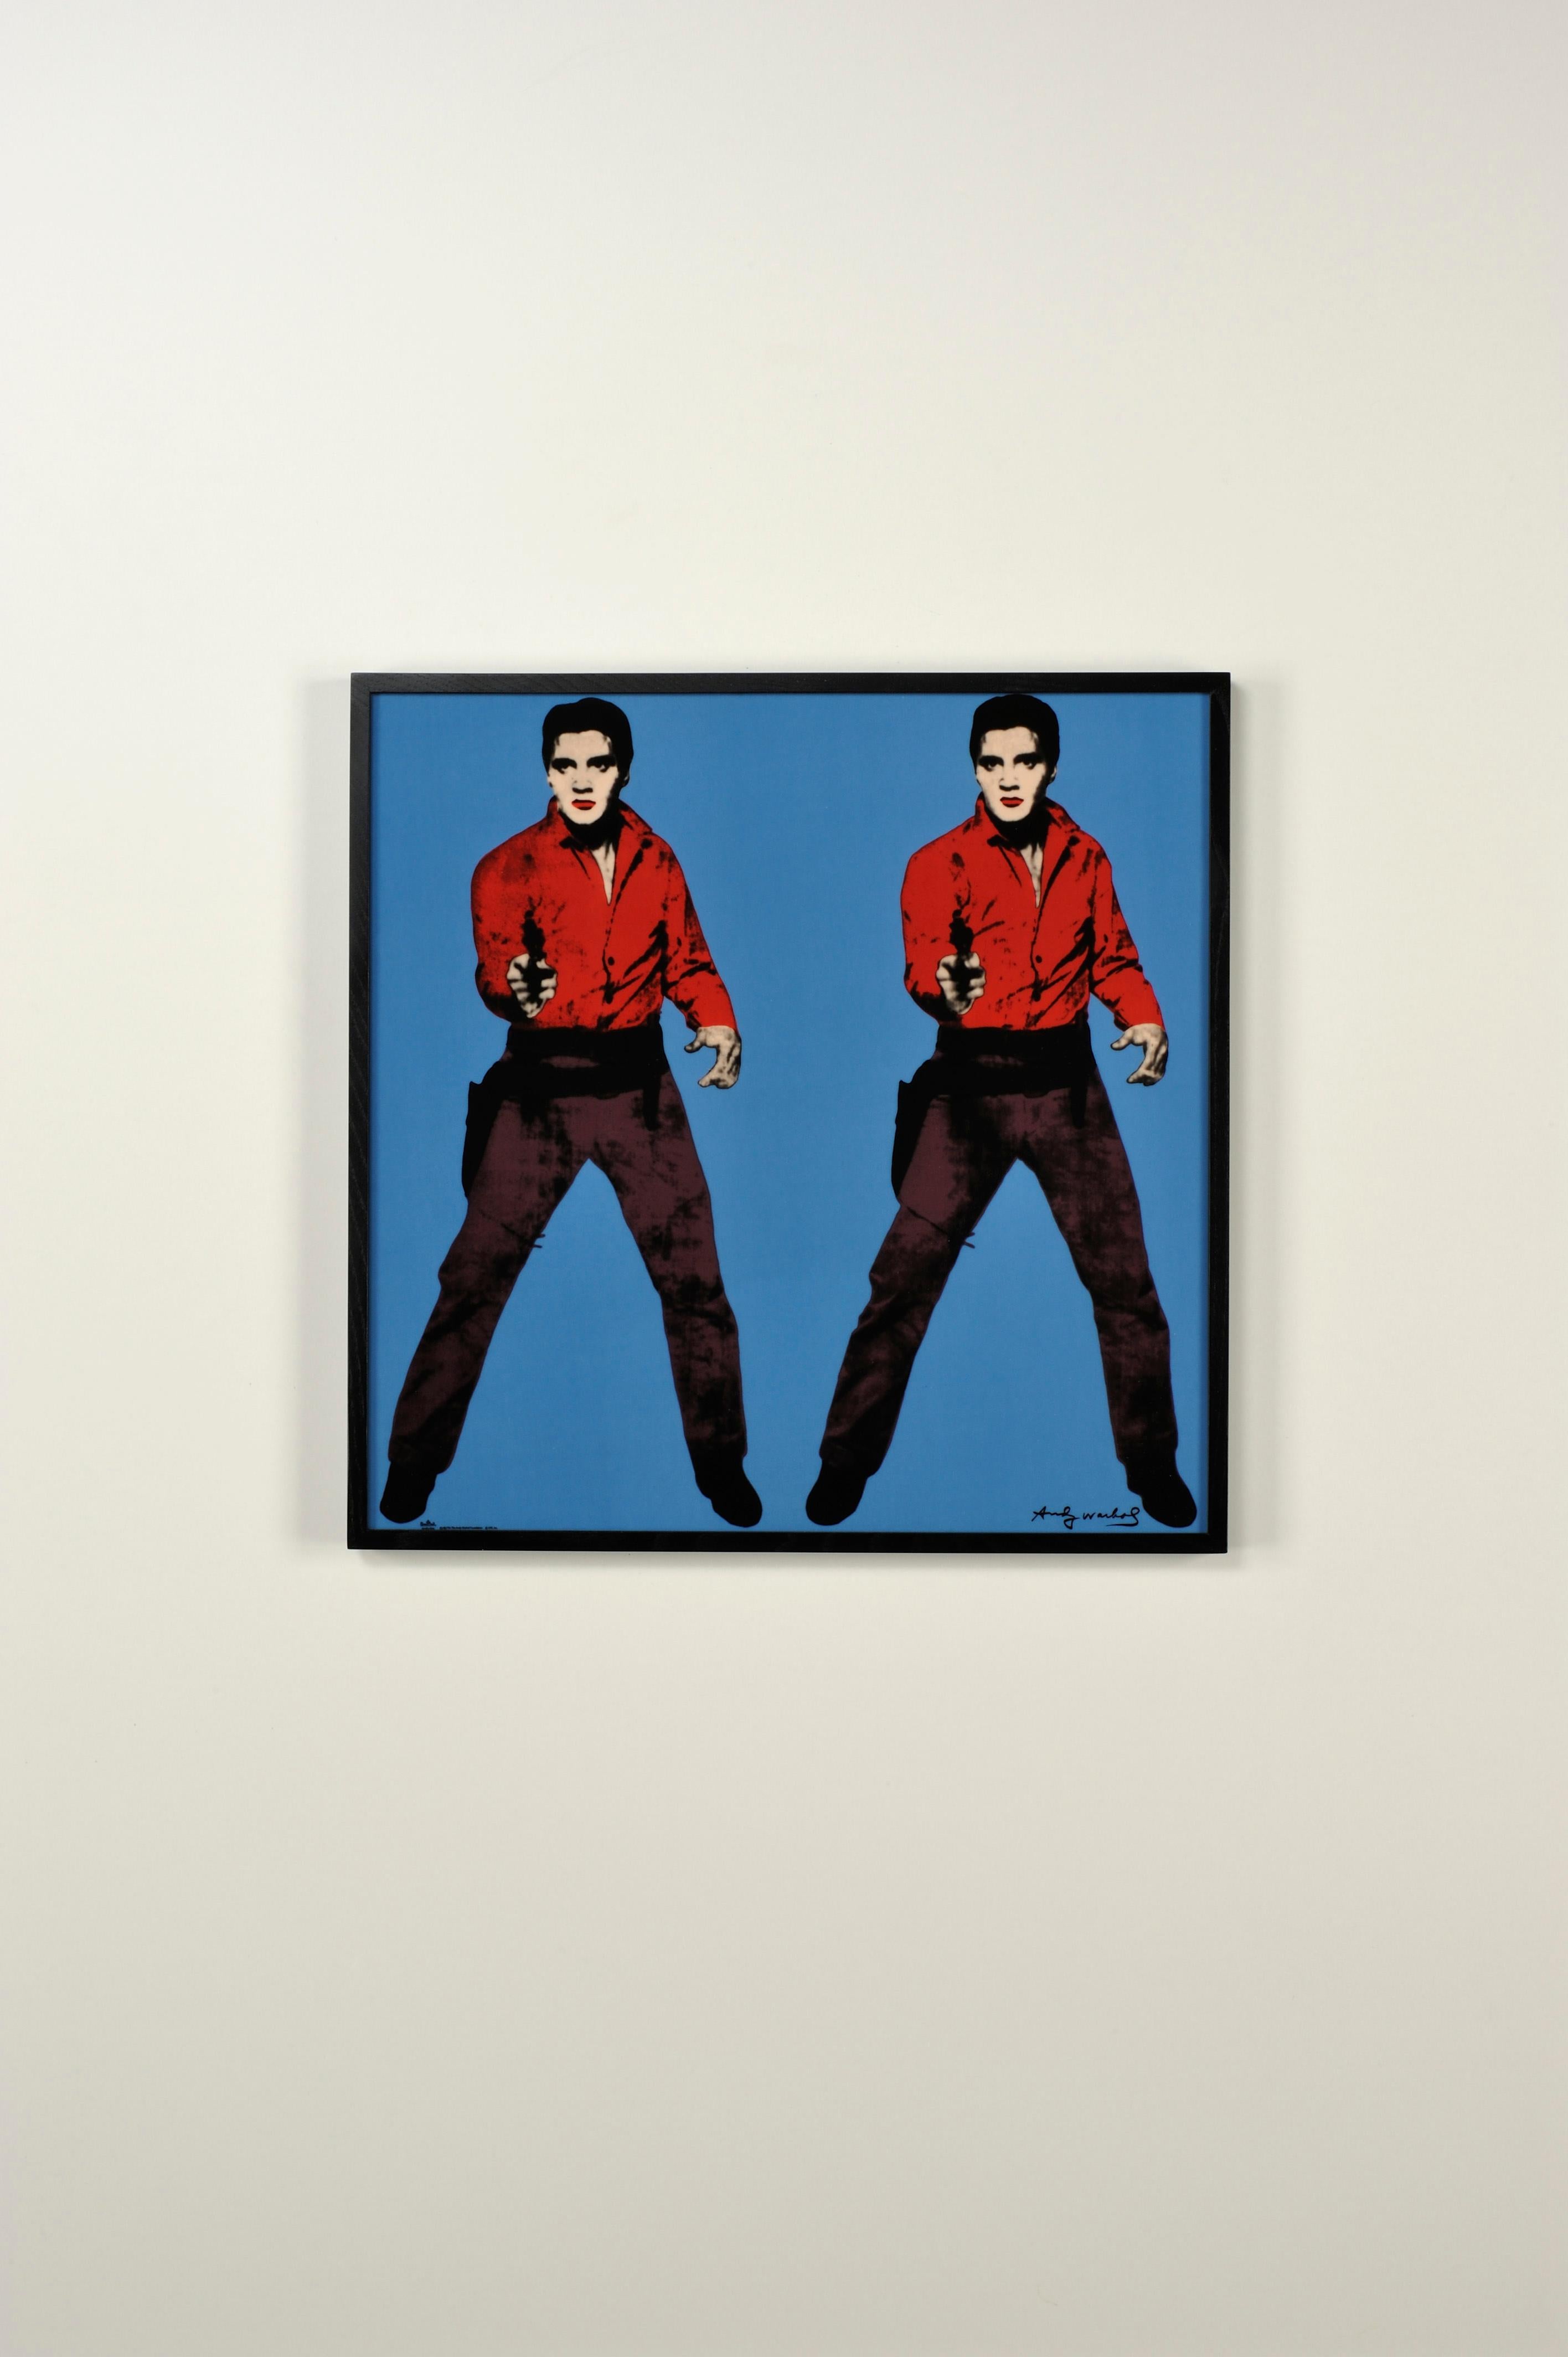 Blue Elvis -Contemporary Art, Editions, Andy Warhol, Framed, Enamel, Pop Art - Print by (after) Andy Warhol